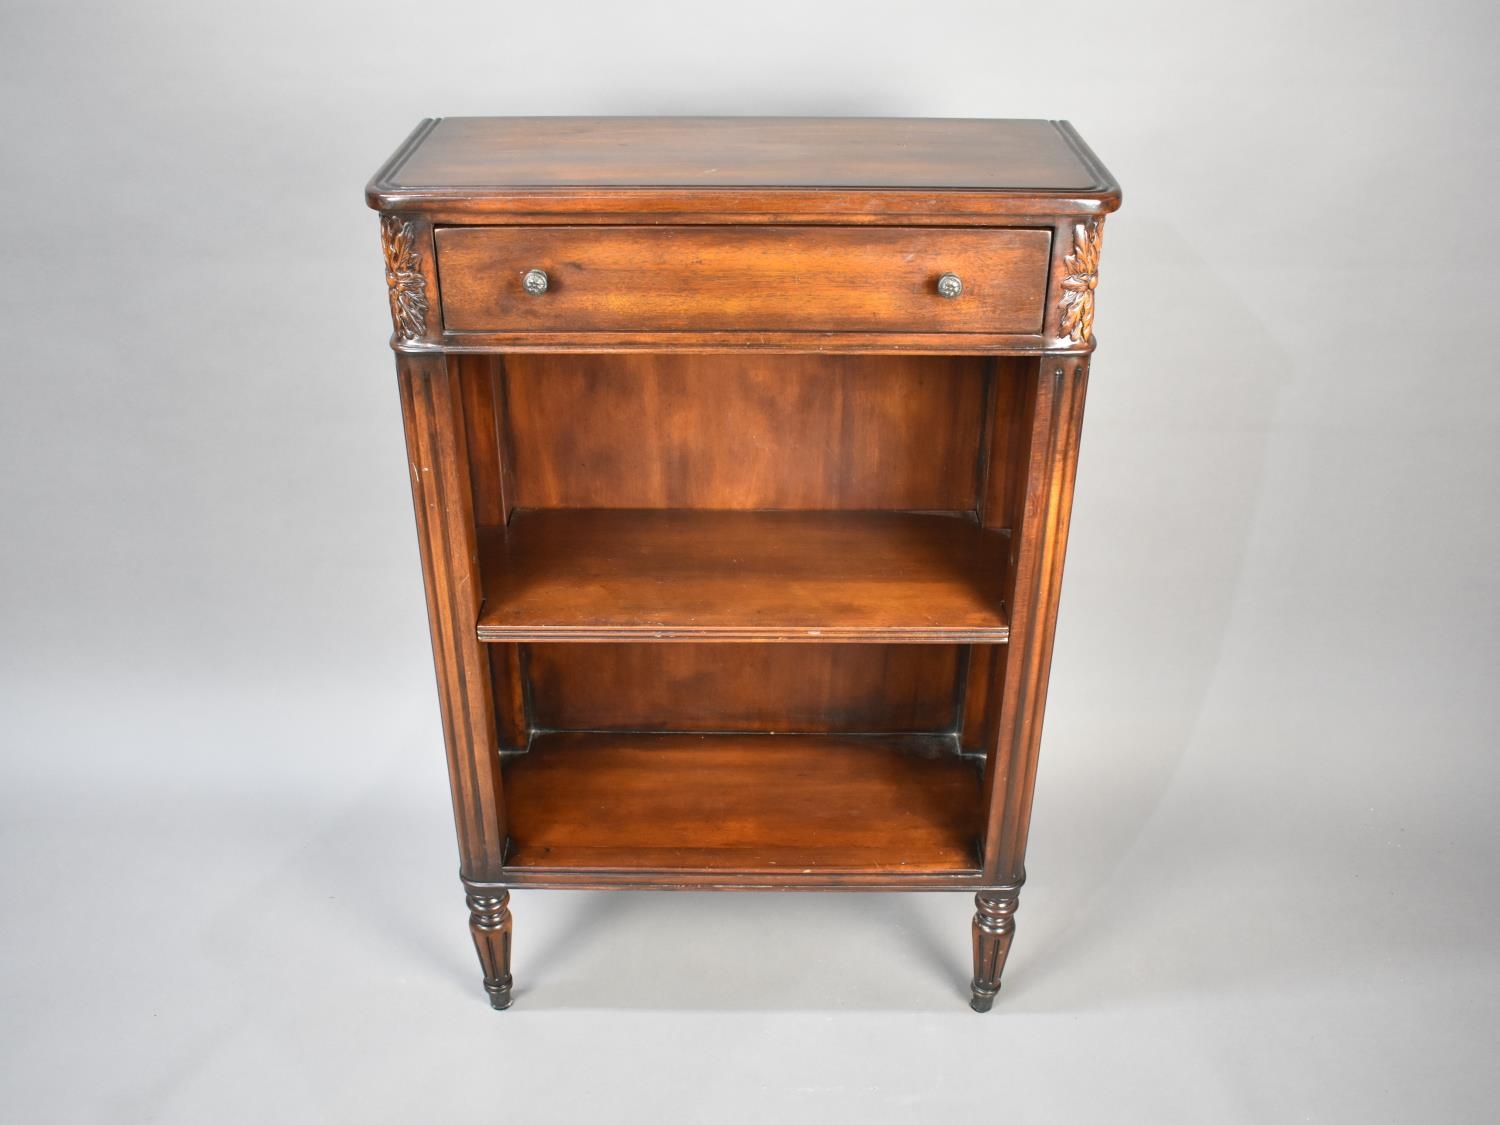 A Theodore Alexander Mahogany 'Republic' Dwarf Bookcase with Top Frieze Drawer and Shelves Below - Image 2 of 3